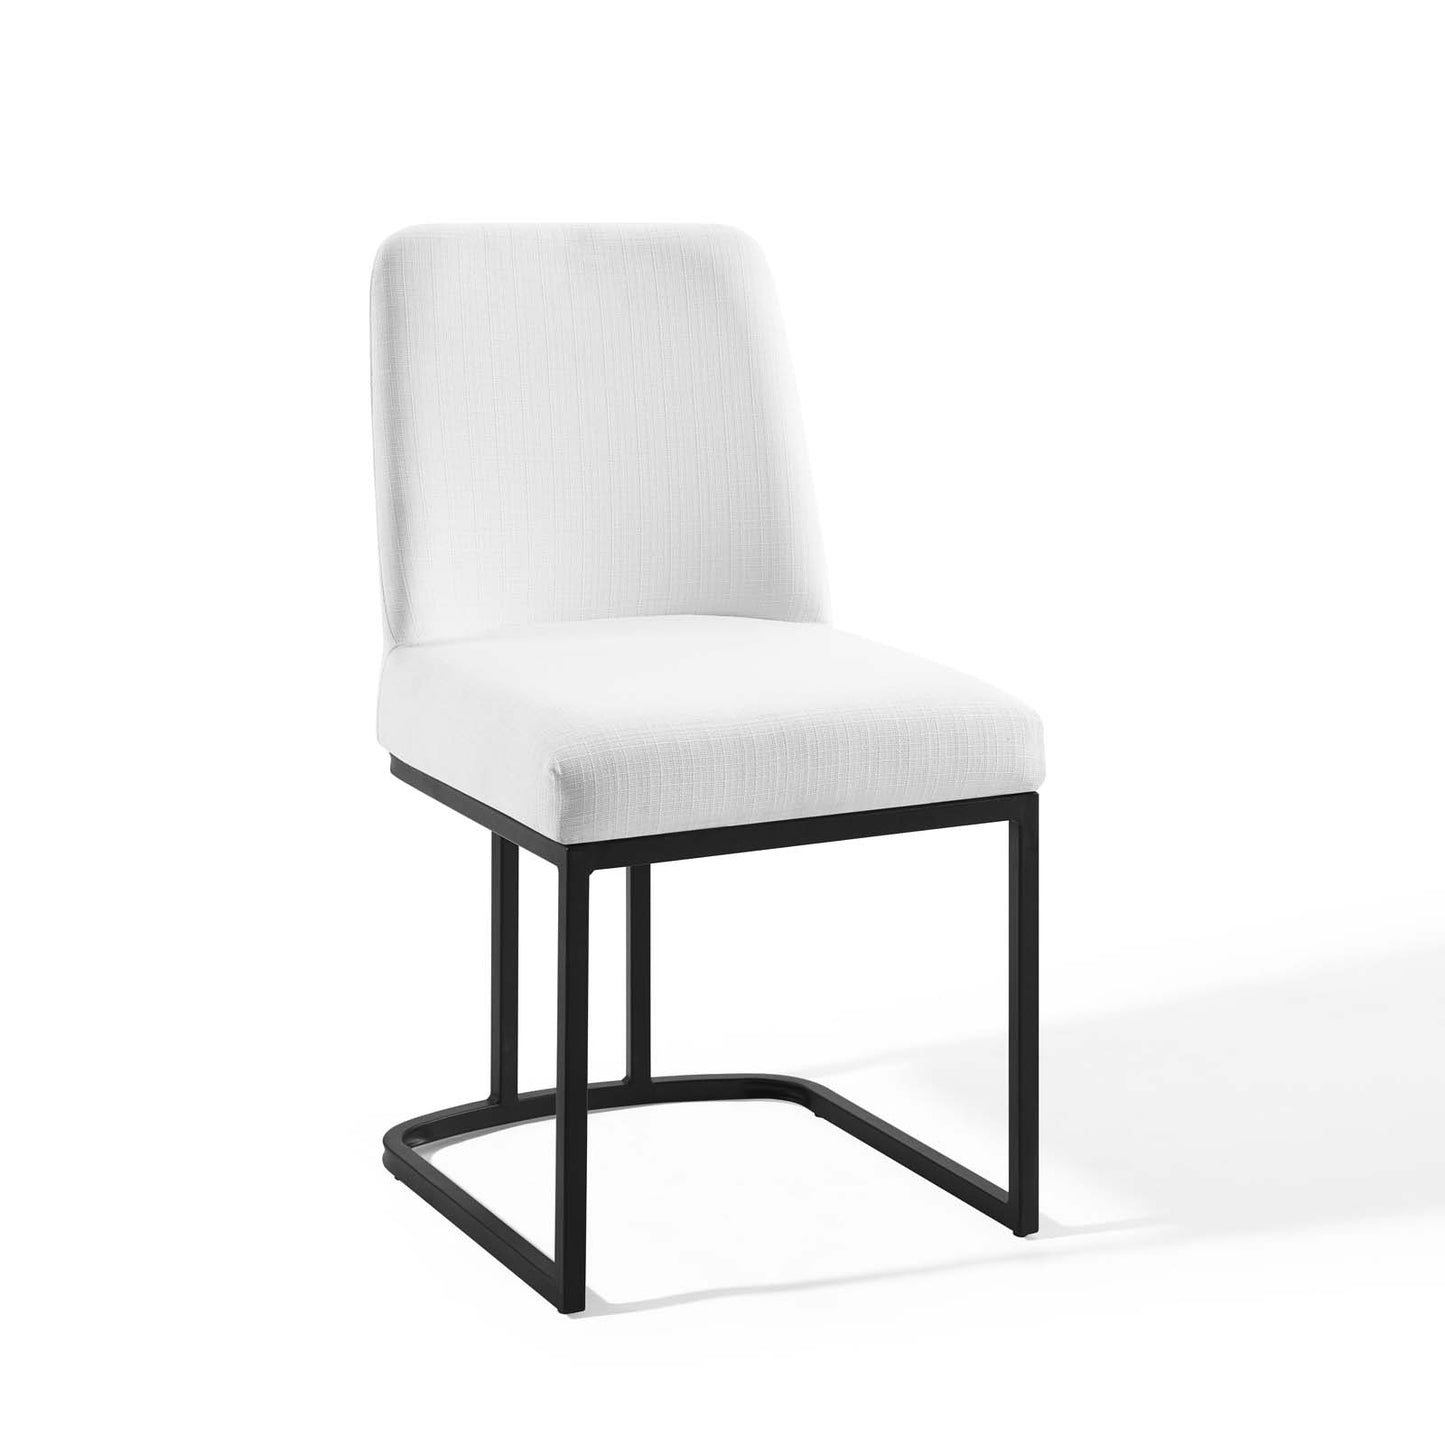 Amplify Sled Base Upholstered Fabric Dining Side Chair Black White EEI-3811-BLK-WHI